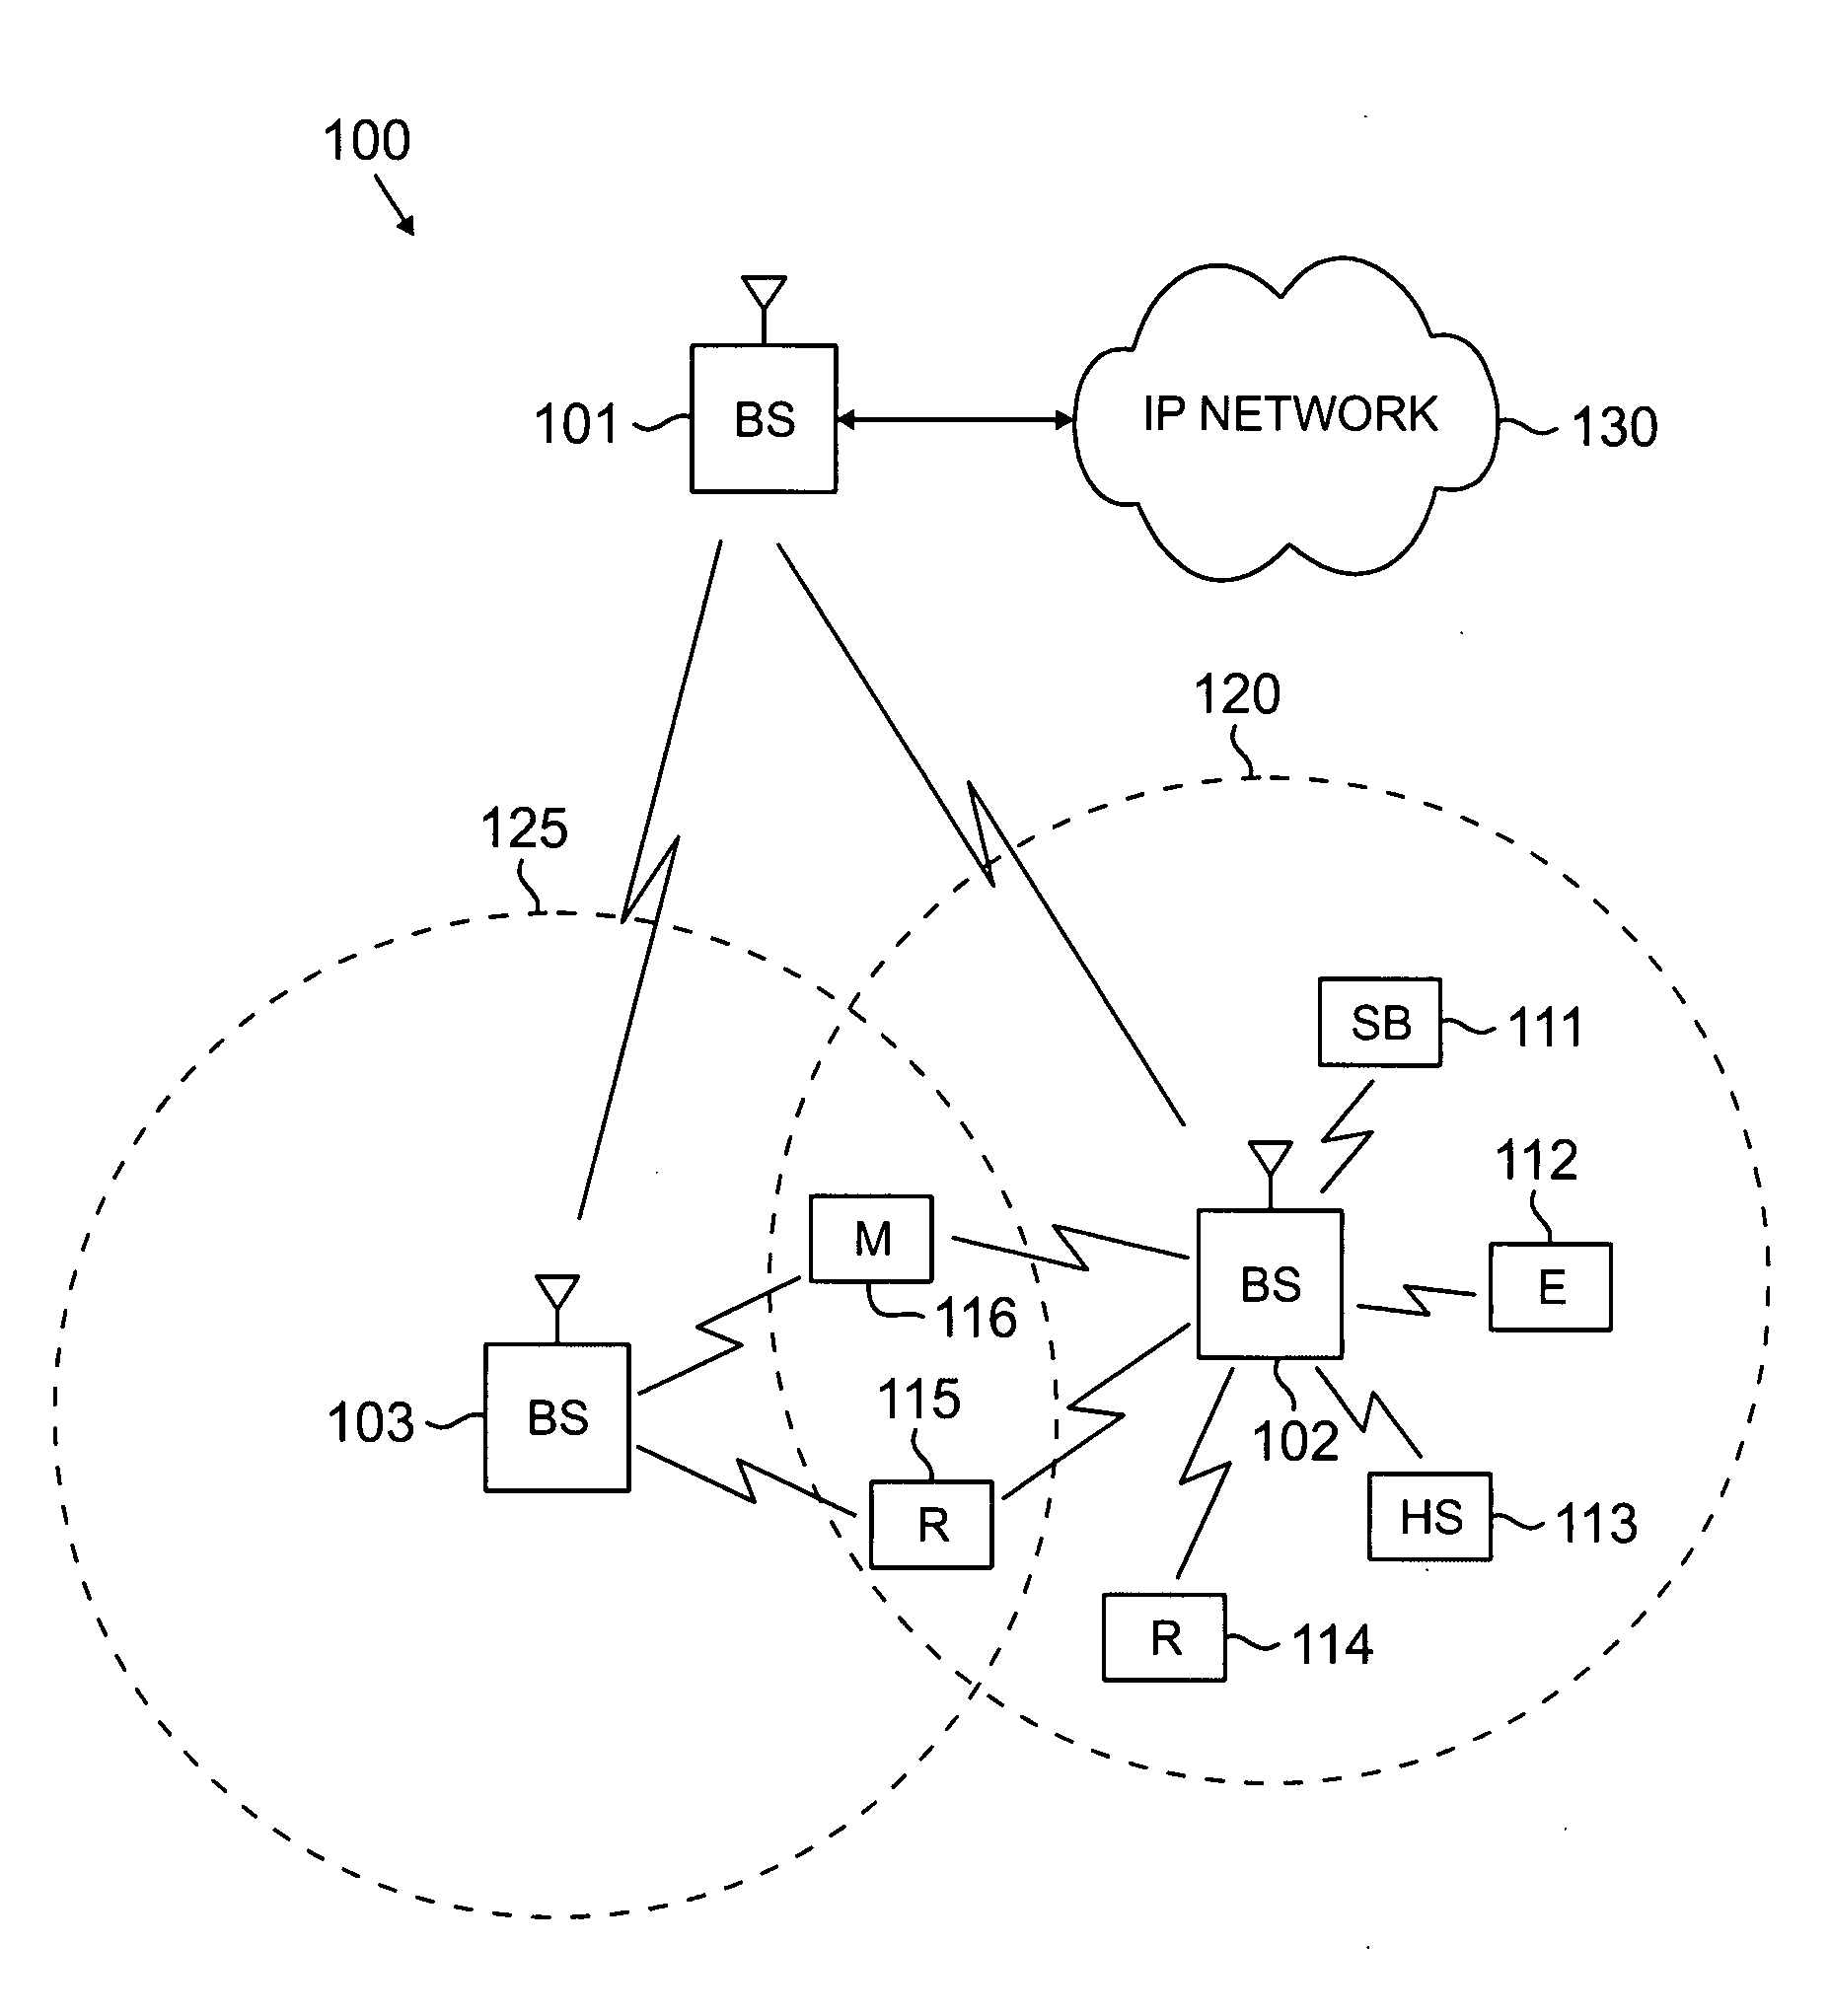 Spectrum sharing in a wireless communication network